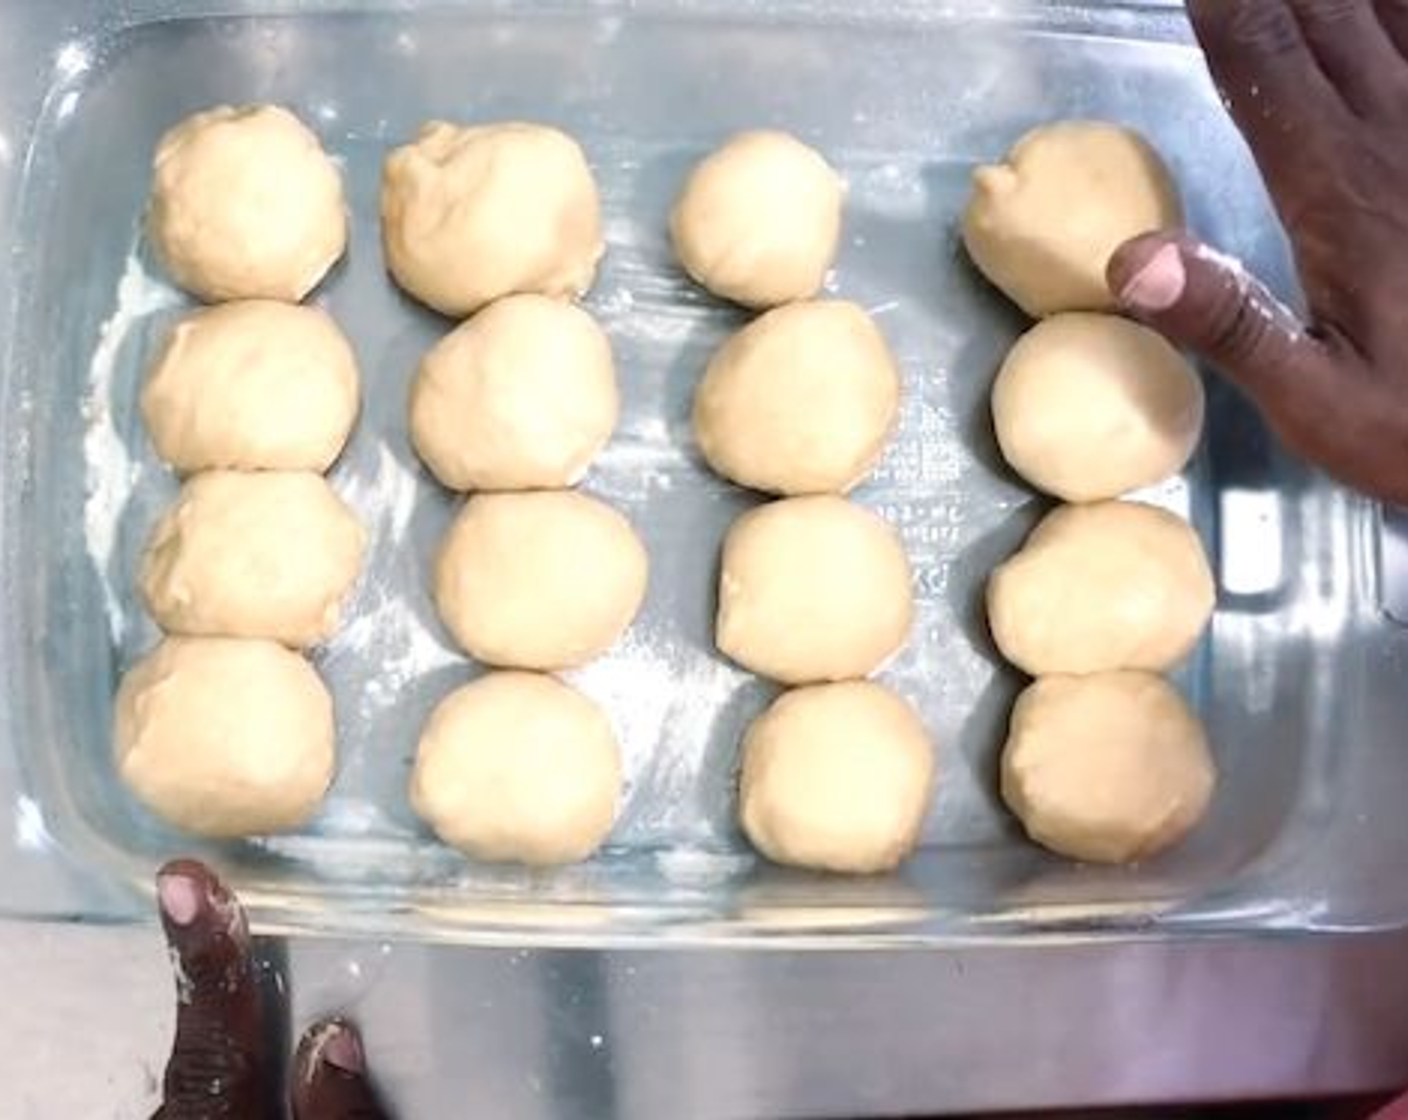 step 8 Create 16 dough balls about 60 grams each. Sprinkle some flour on your surface. Gather the outside edges and pinch towards the bottom, roll so they have a smooth top and a small crease in the bottom. Place in your baking dish and let it sit for 45 minutes.